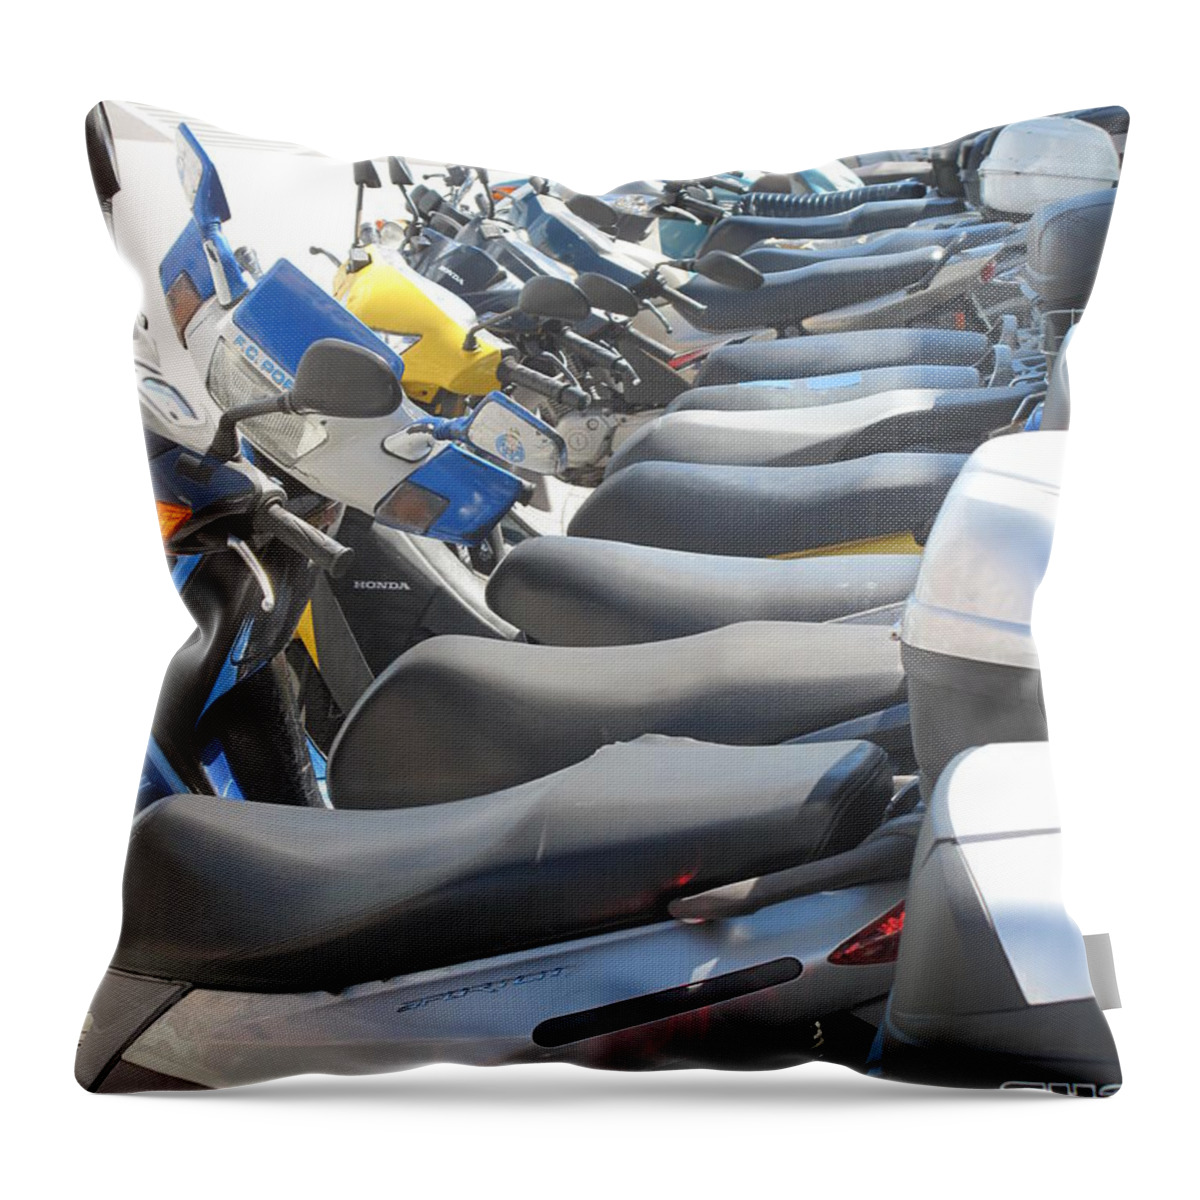 Scooters Throw Pillow featuring the photograph Bermuda Scooters by Ian MacDonald